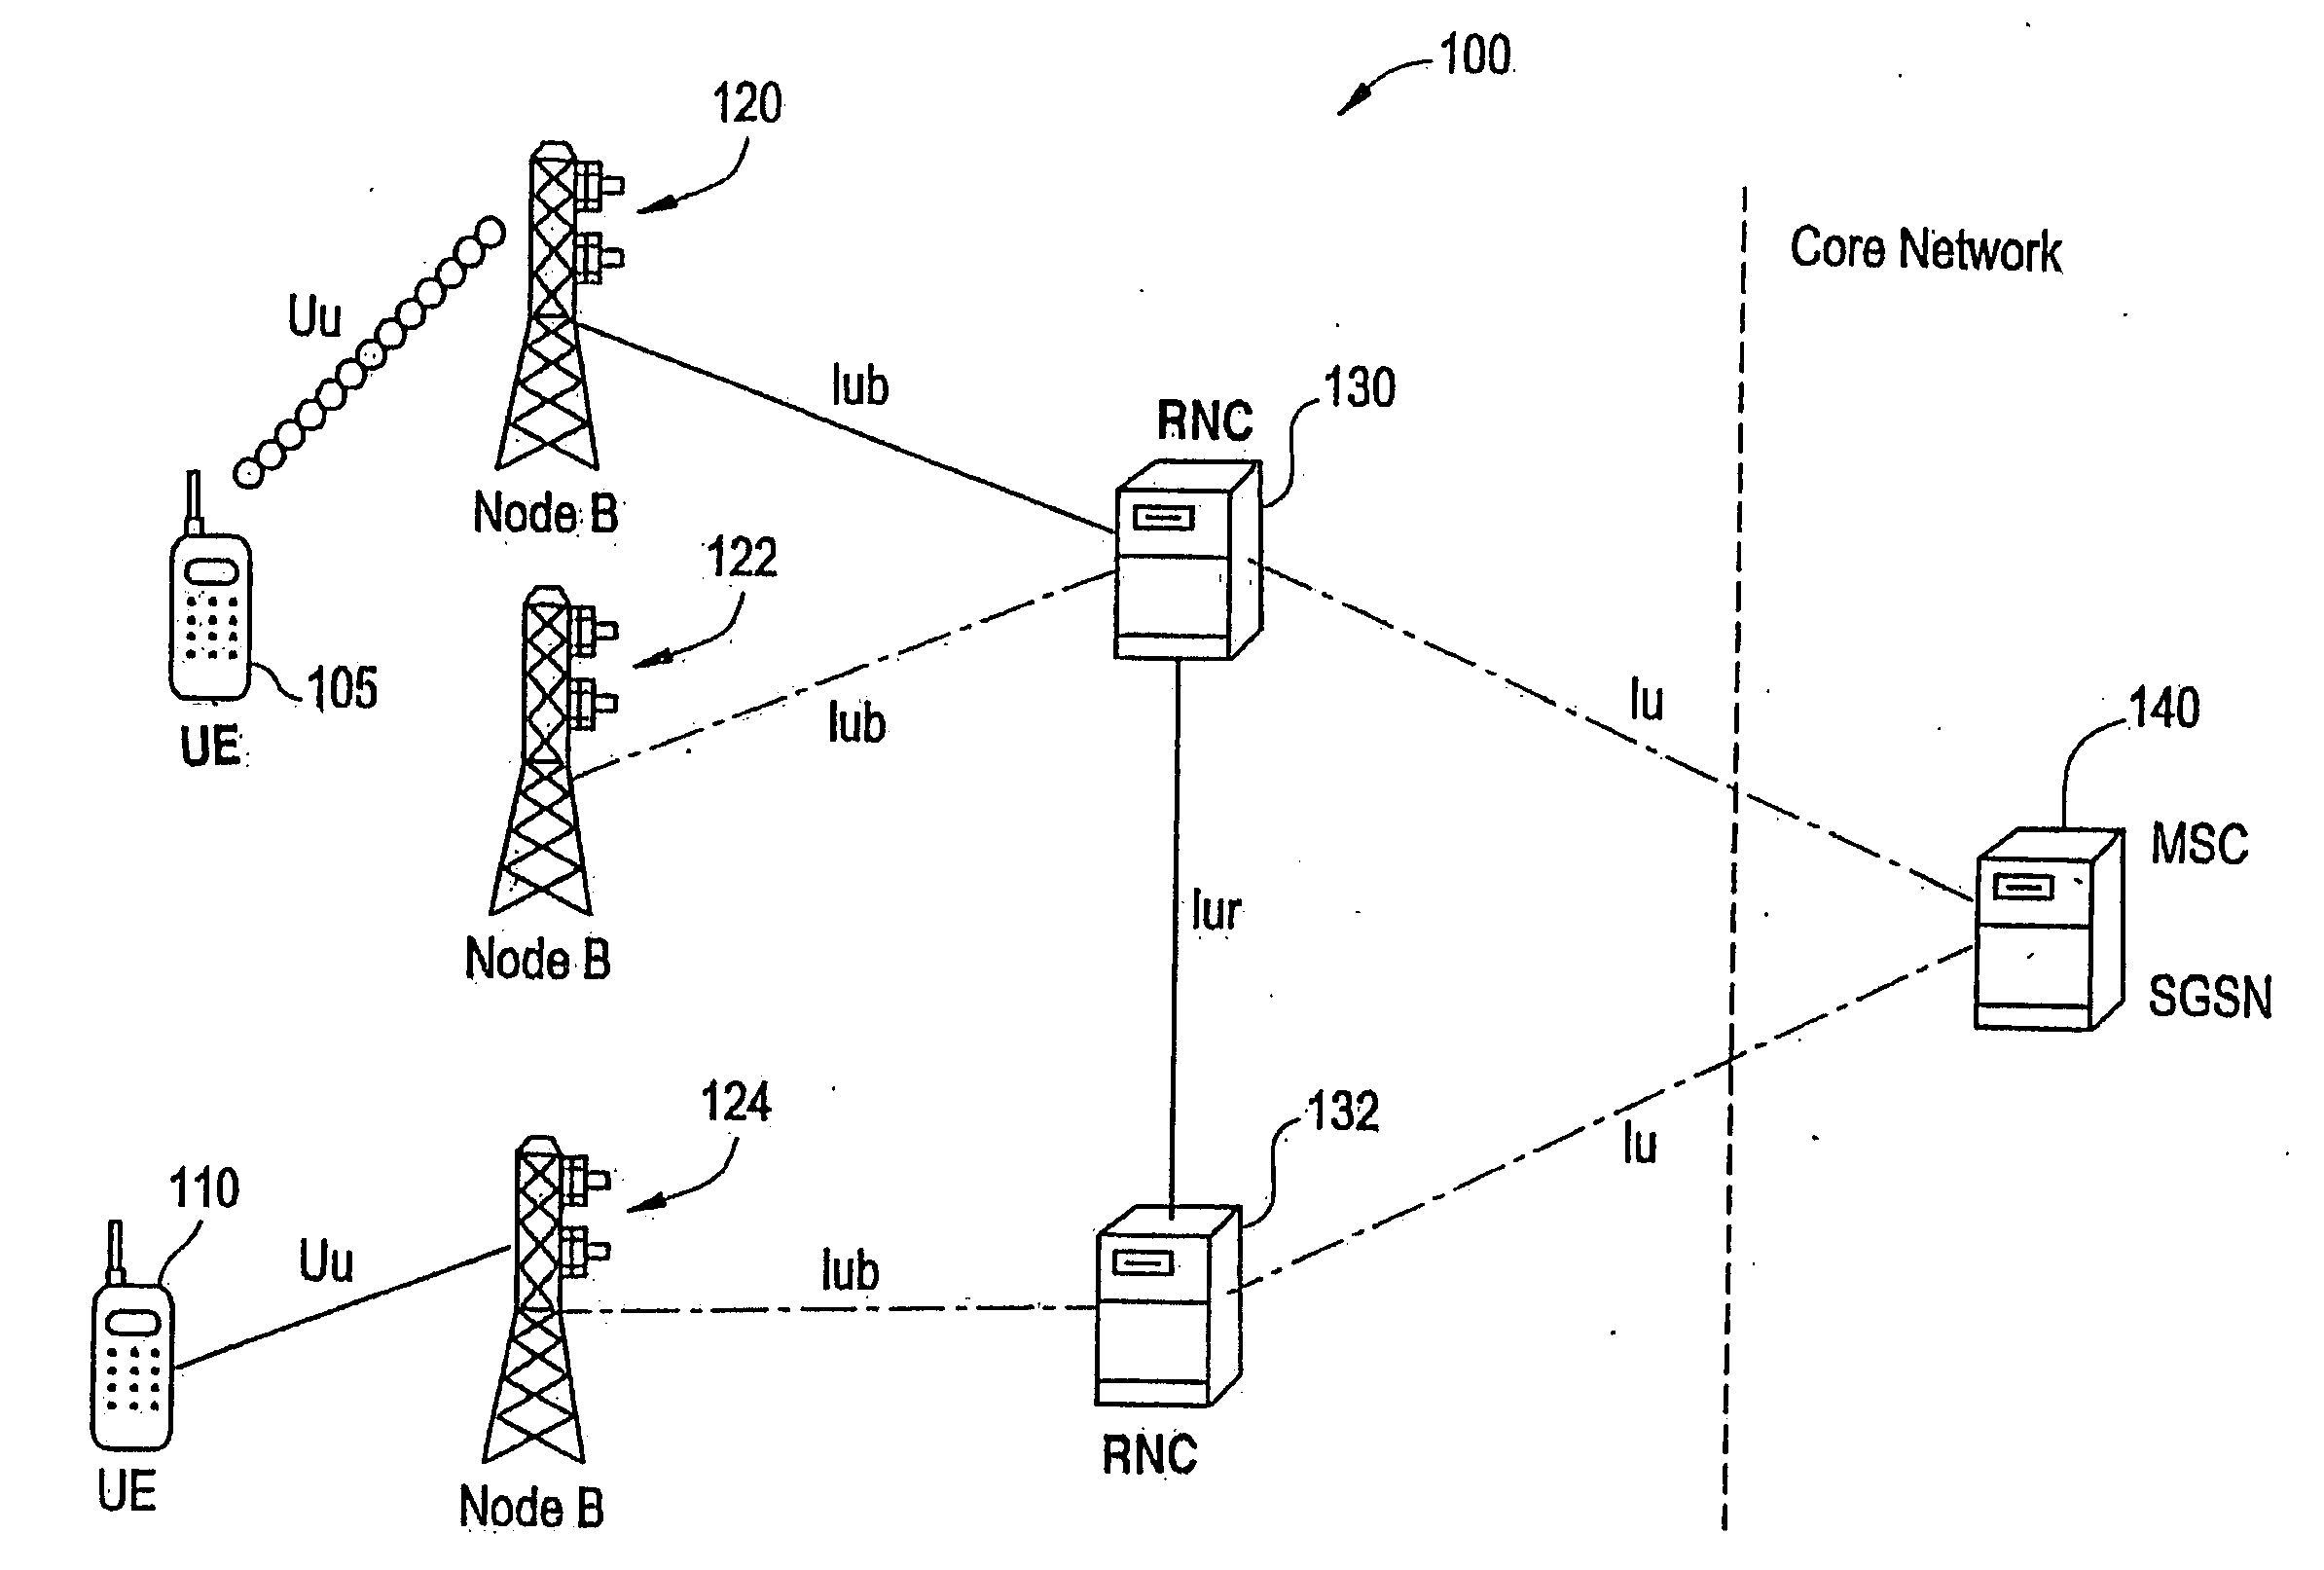 Method of determining when a mobile station is ready to be served during a handoff in a wireless communications network